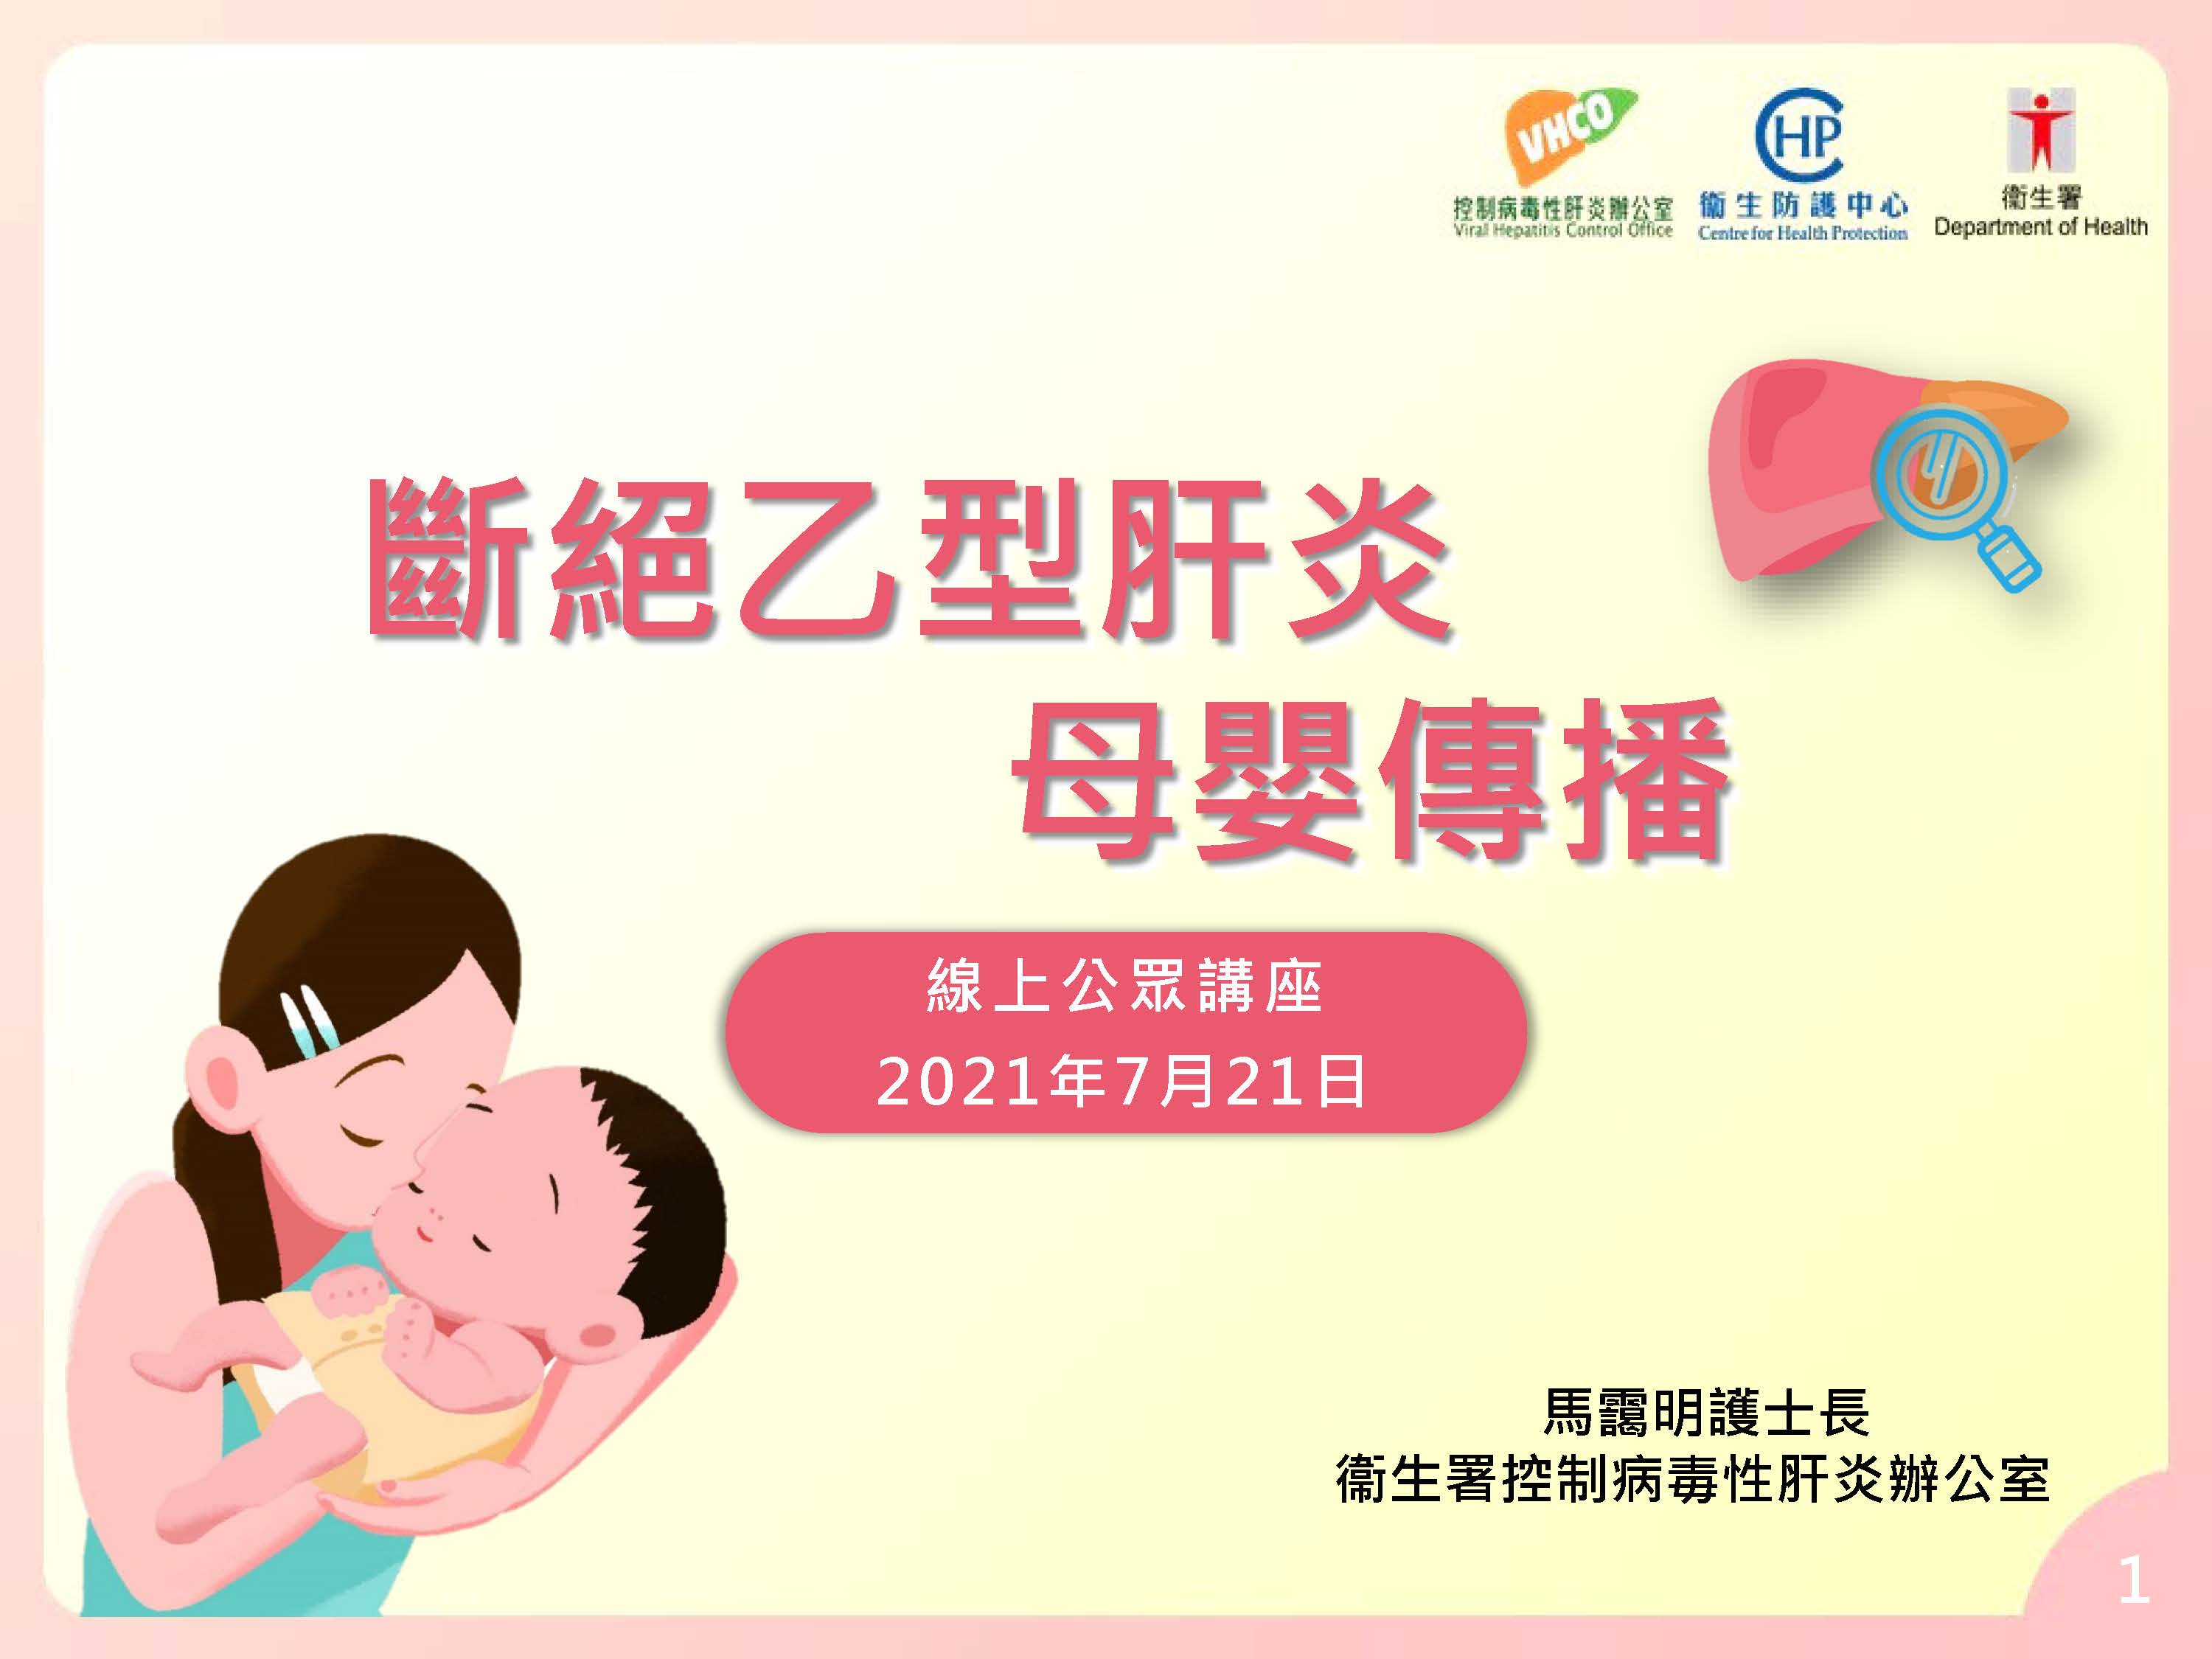 Public health talk on “Stop mother-to-child transmission” (only Chinese version available)